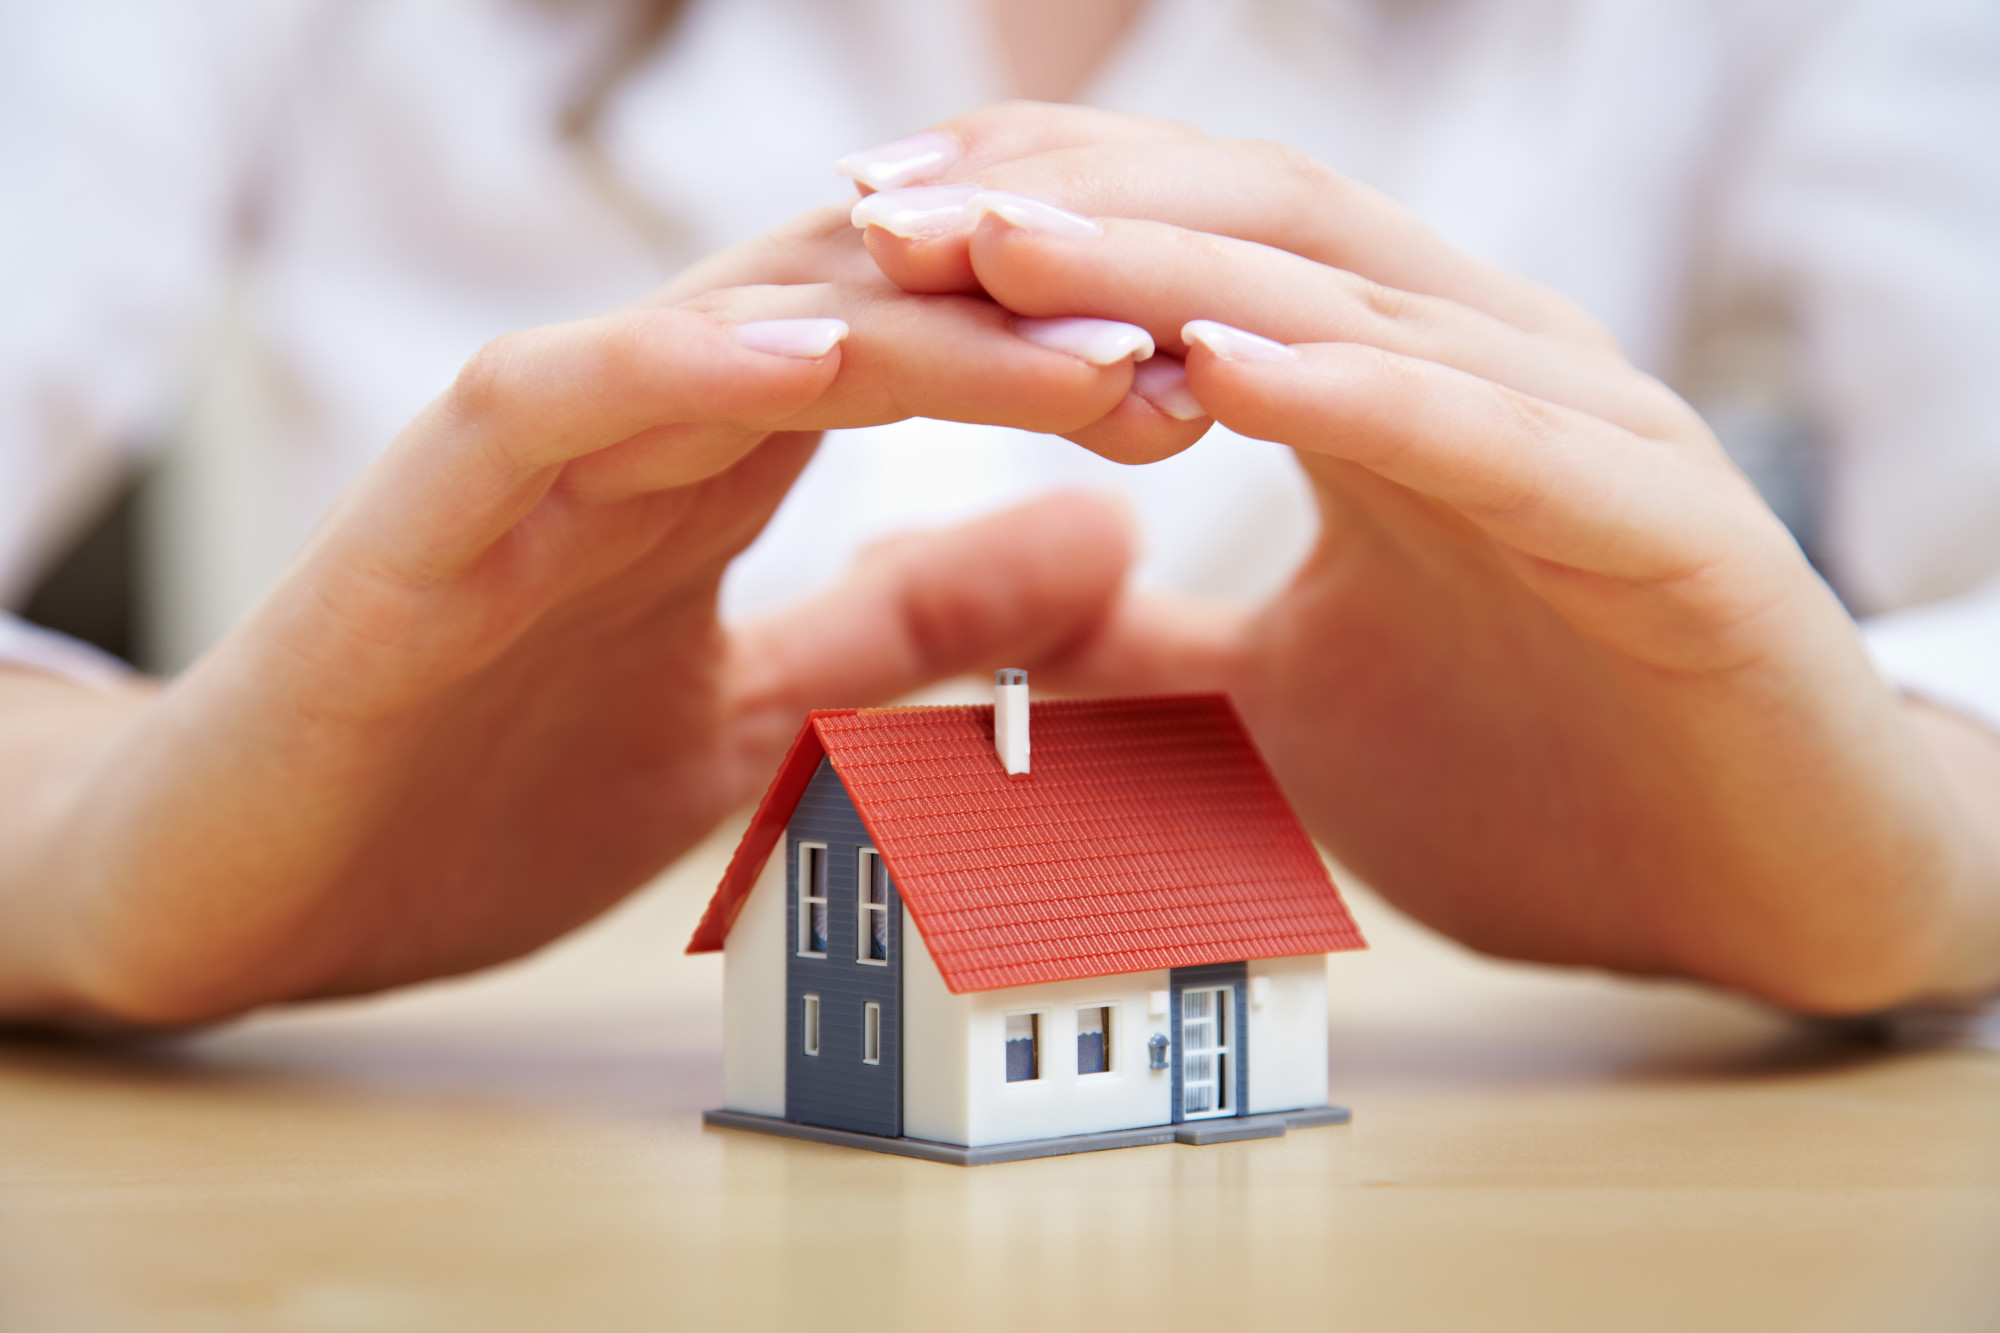 Home insurance can be confusing and overwhelming. Learn about the different types of home insurance in this helpful guide.